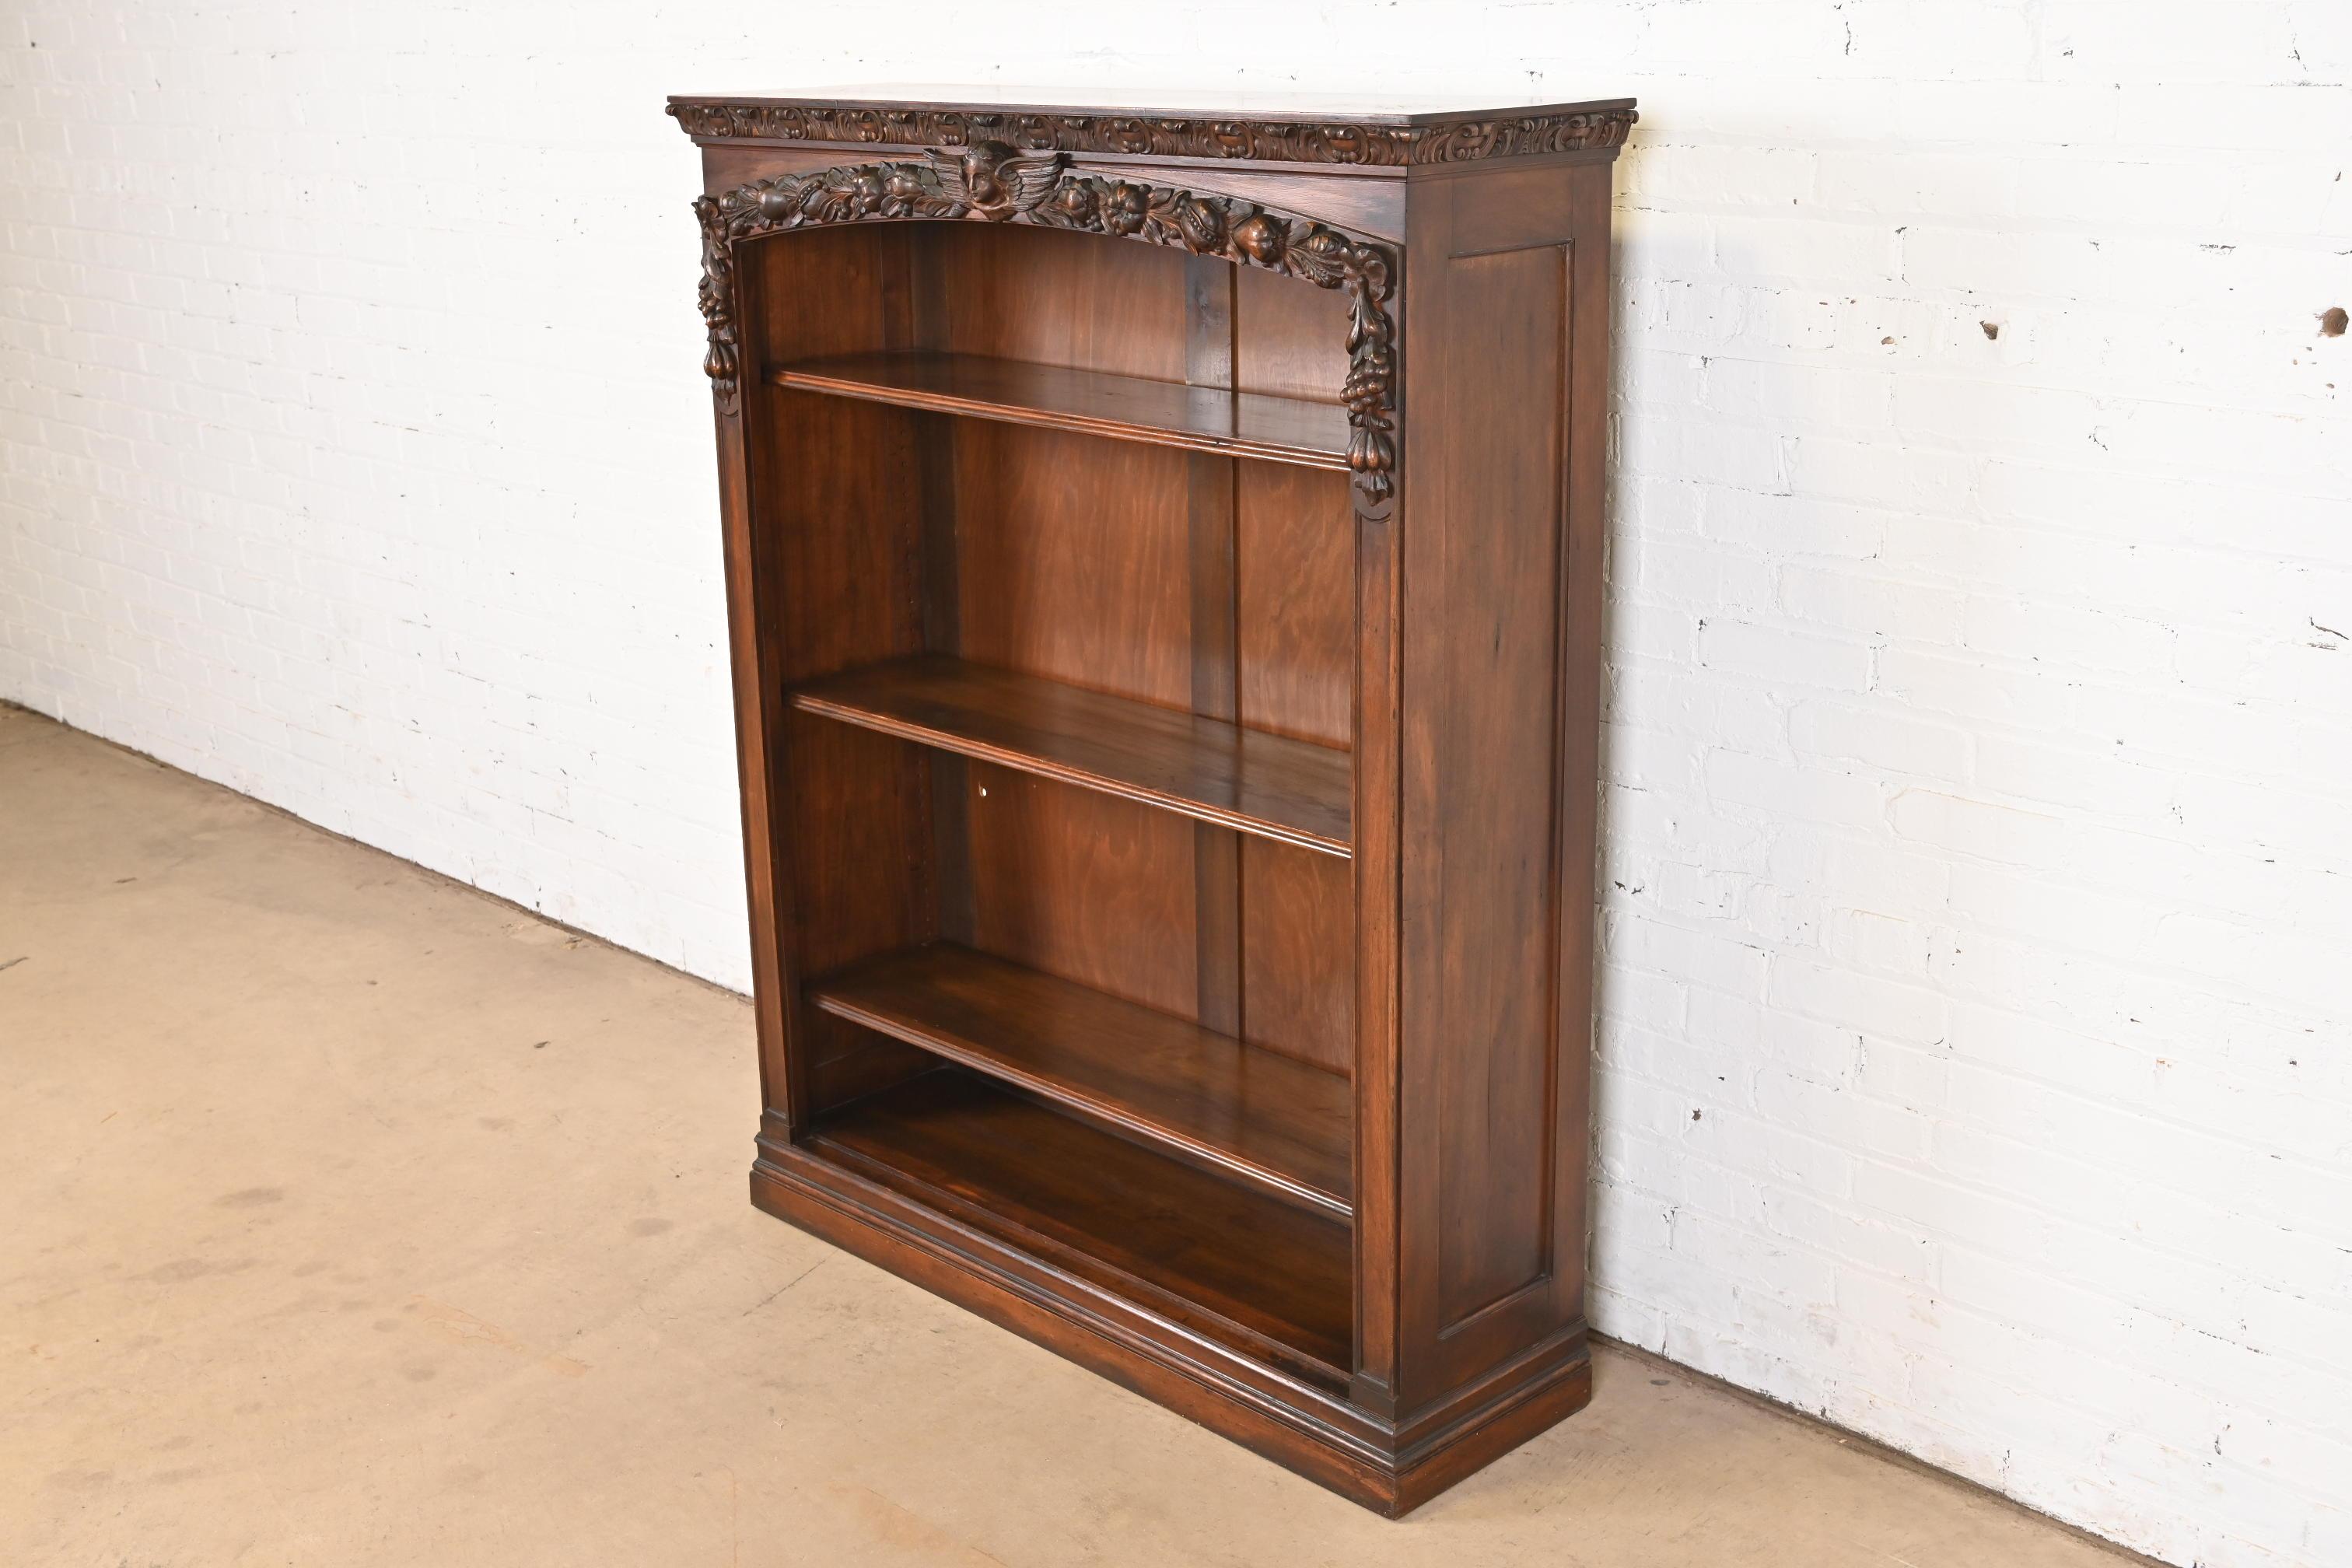 R.J. Horner Style Antique Victorian Renaissance Revival Walnut Bookcase In Good Condition For Sale In South Bend, IN